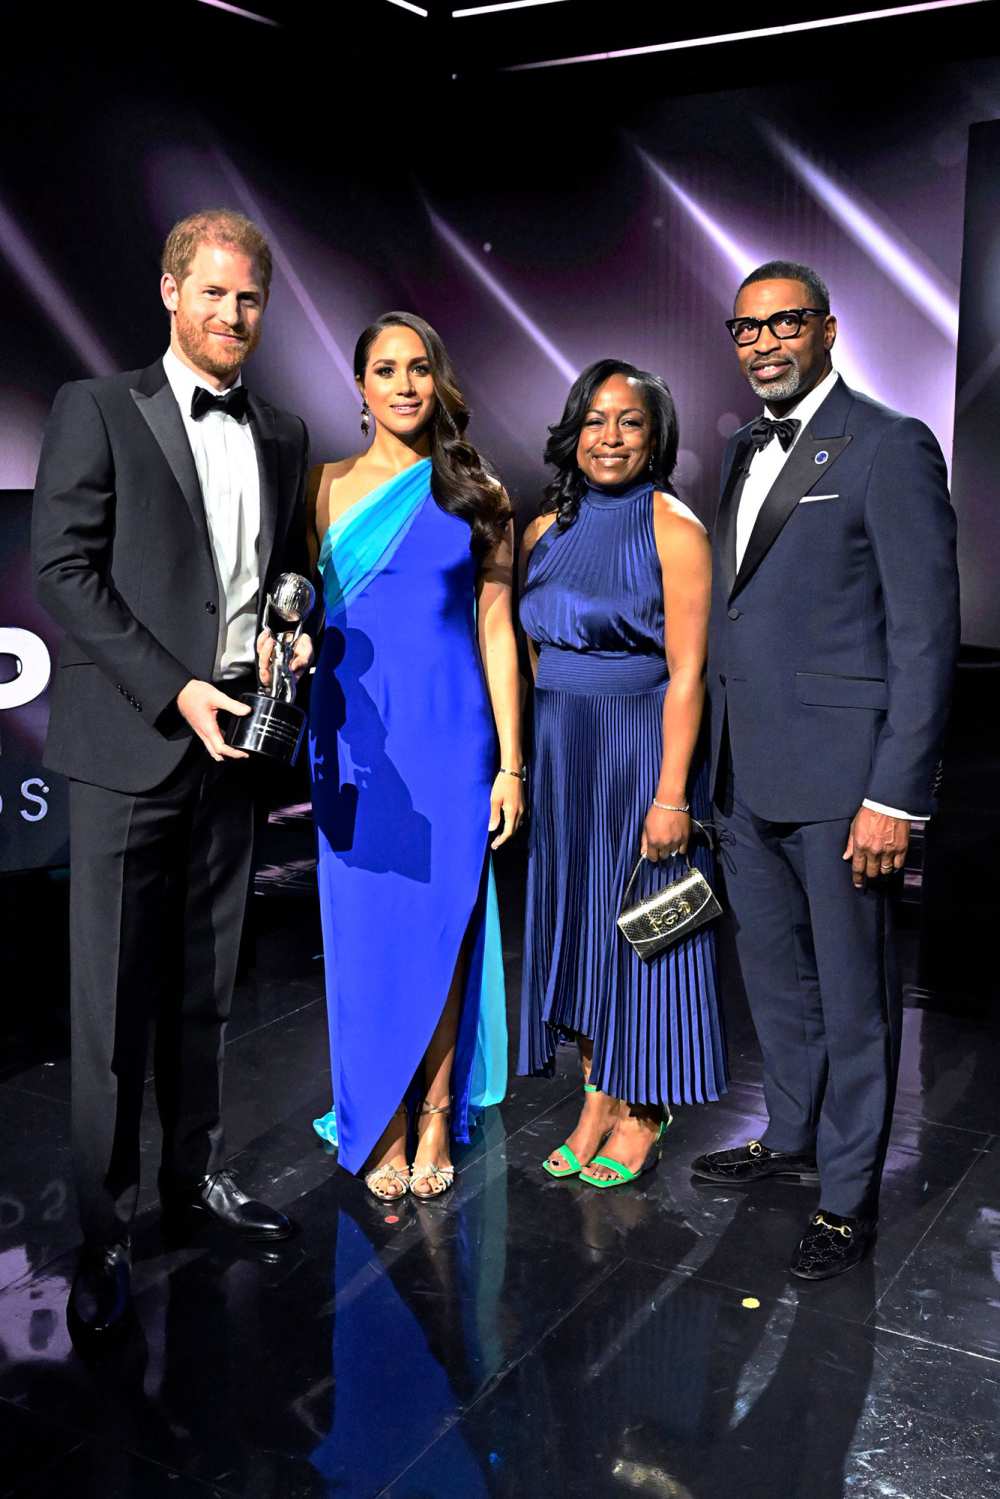 Prince Harry and Meghan Markle Accept President's Award at 2022 NAACP Image Awards